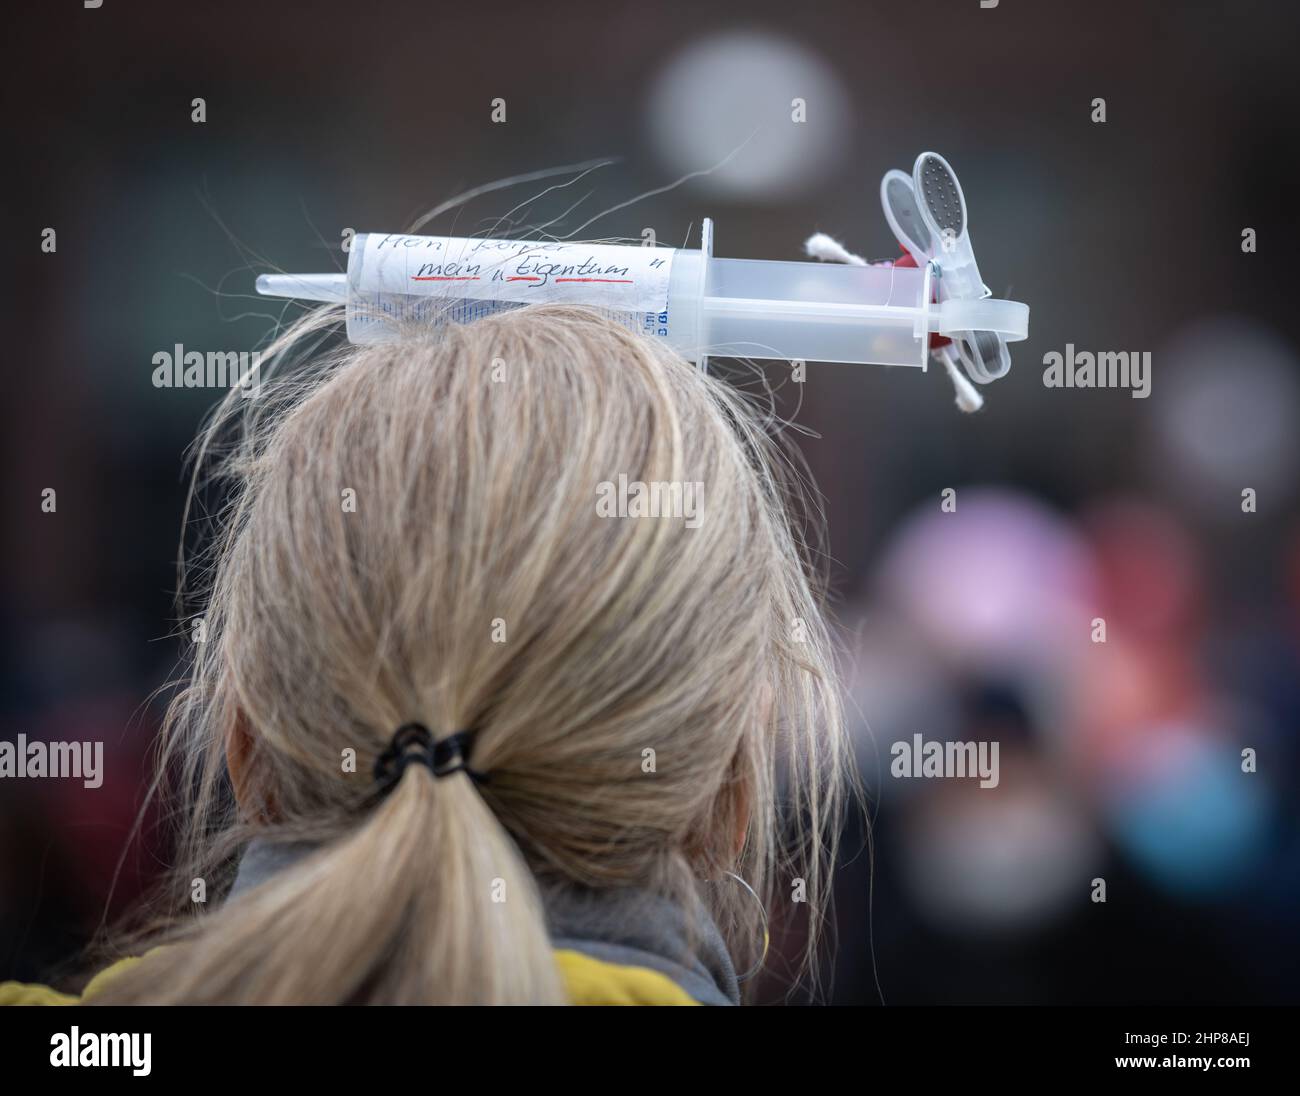 19 February 2022, Hessen, Frankfurt/Main: A woman carries a syringe on her head with the inscription "My body, my property" during a demonstration of several thousand people against corona measures and compulsory vaccination in downtown Frankfurt. Photo: Frank Rumpenhorst/dpa Stock Photo